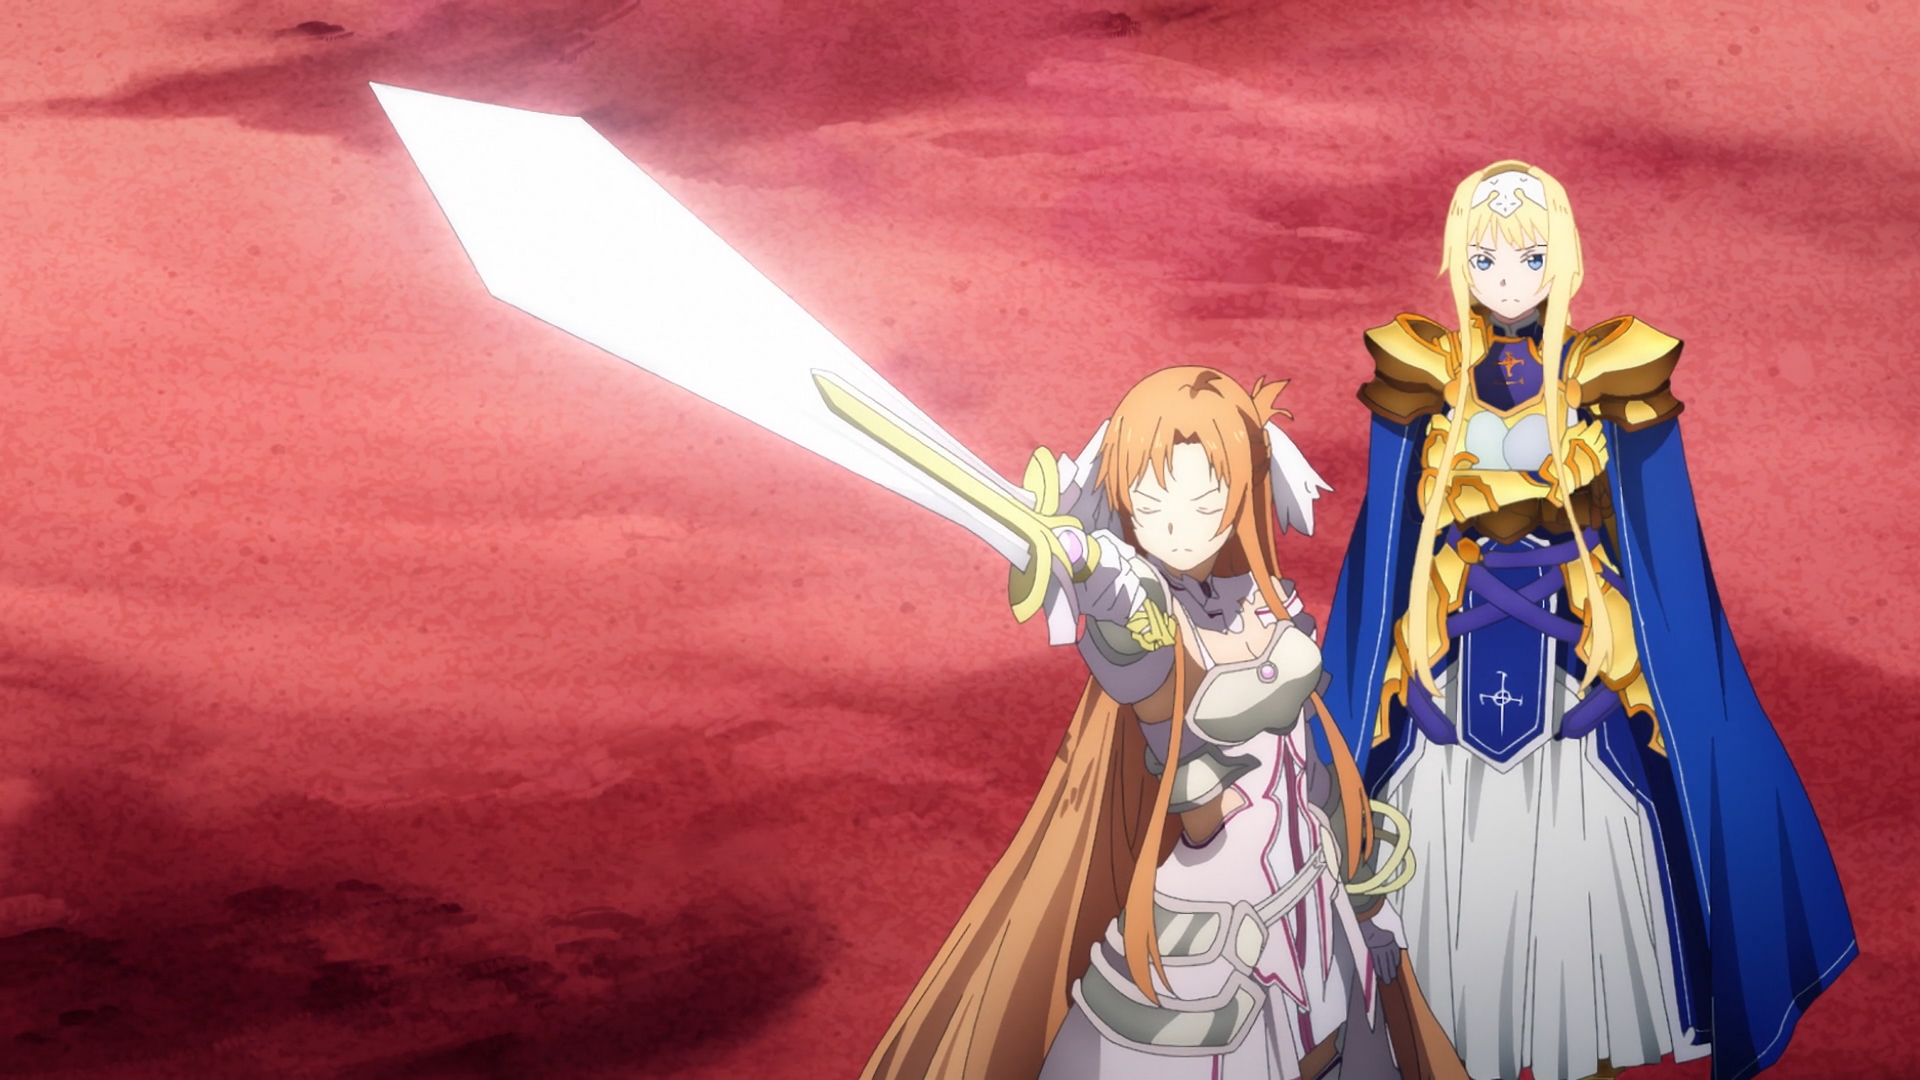 So just finished SAO in netflix from aincrad to alicization war of  underworld. Never have i loved and related to an anime this much! No wonder  its so popular! Just bought my